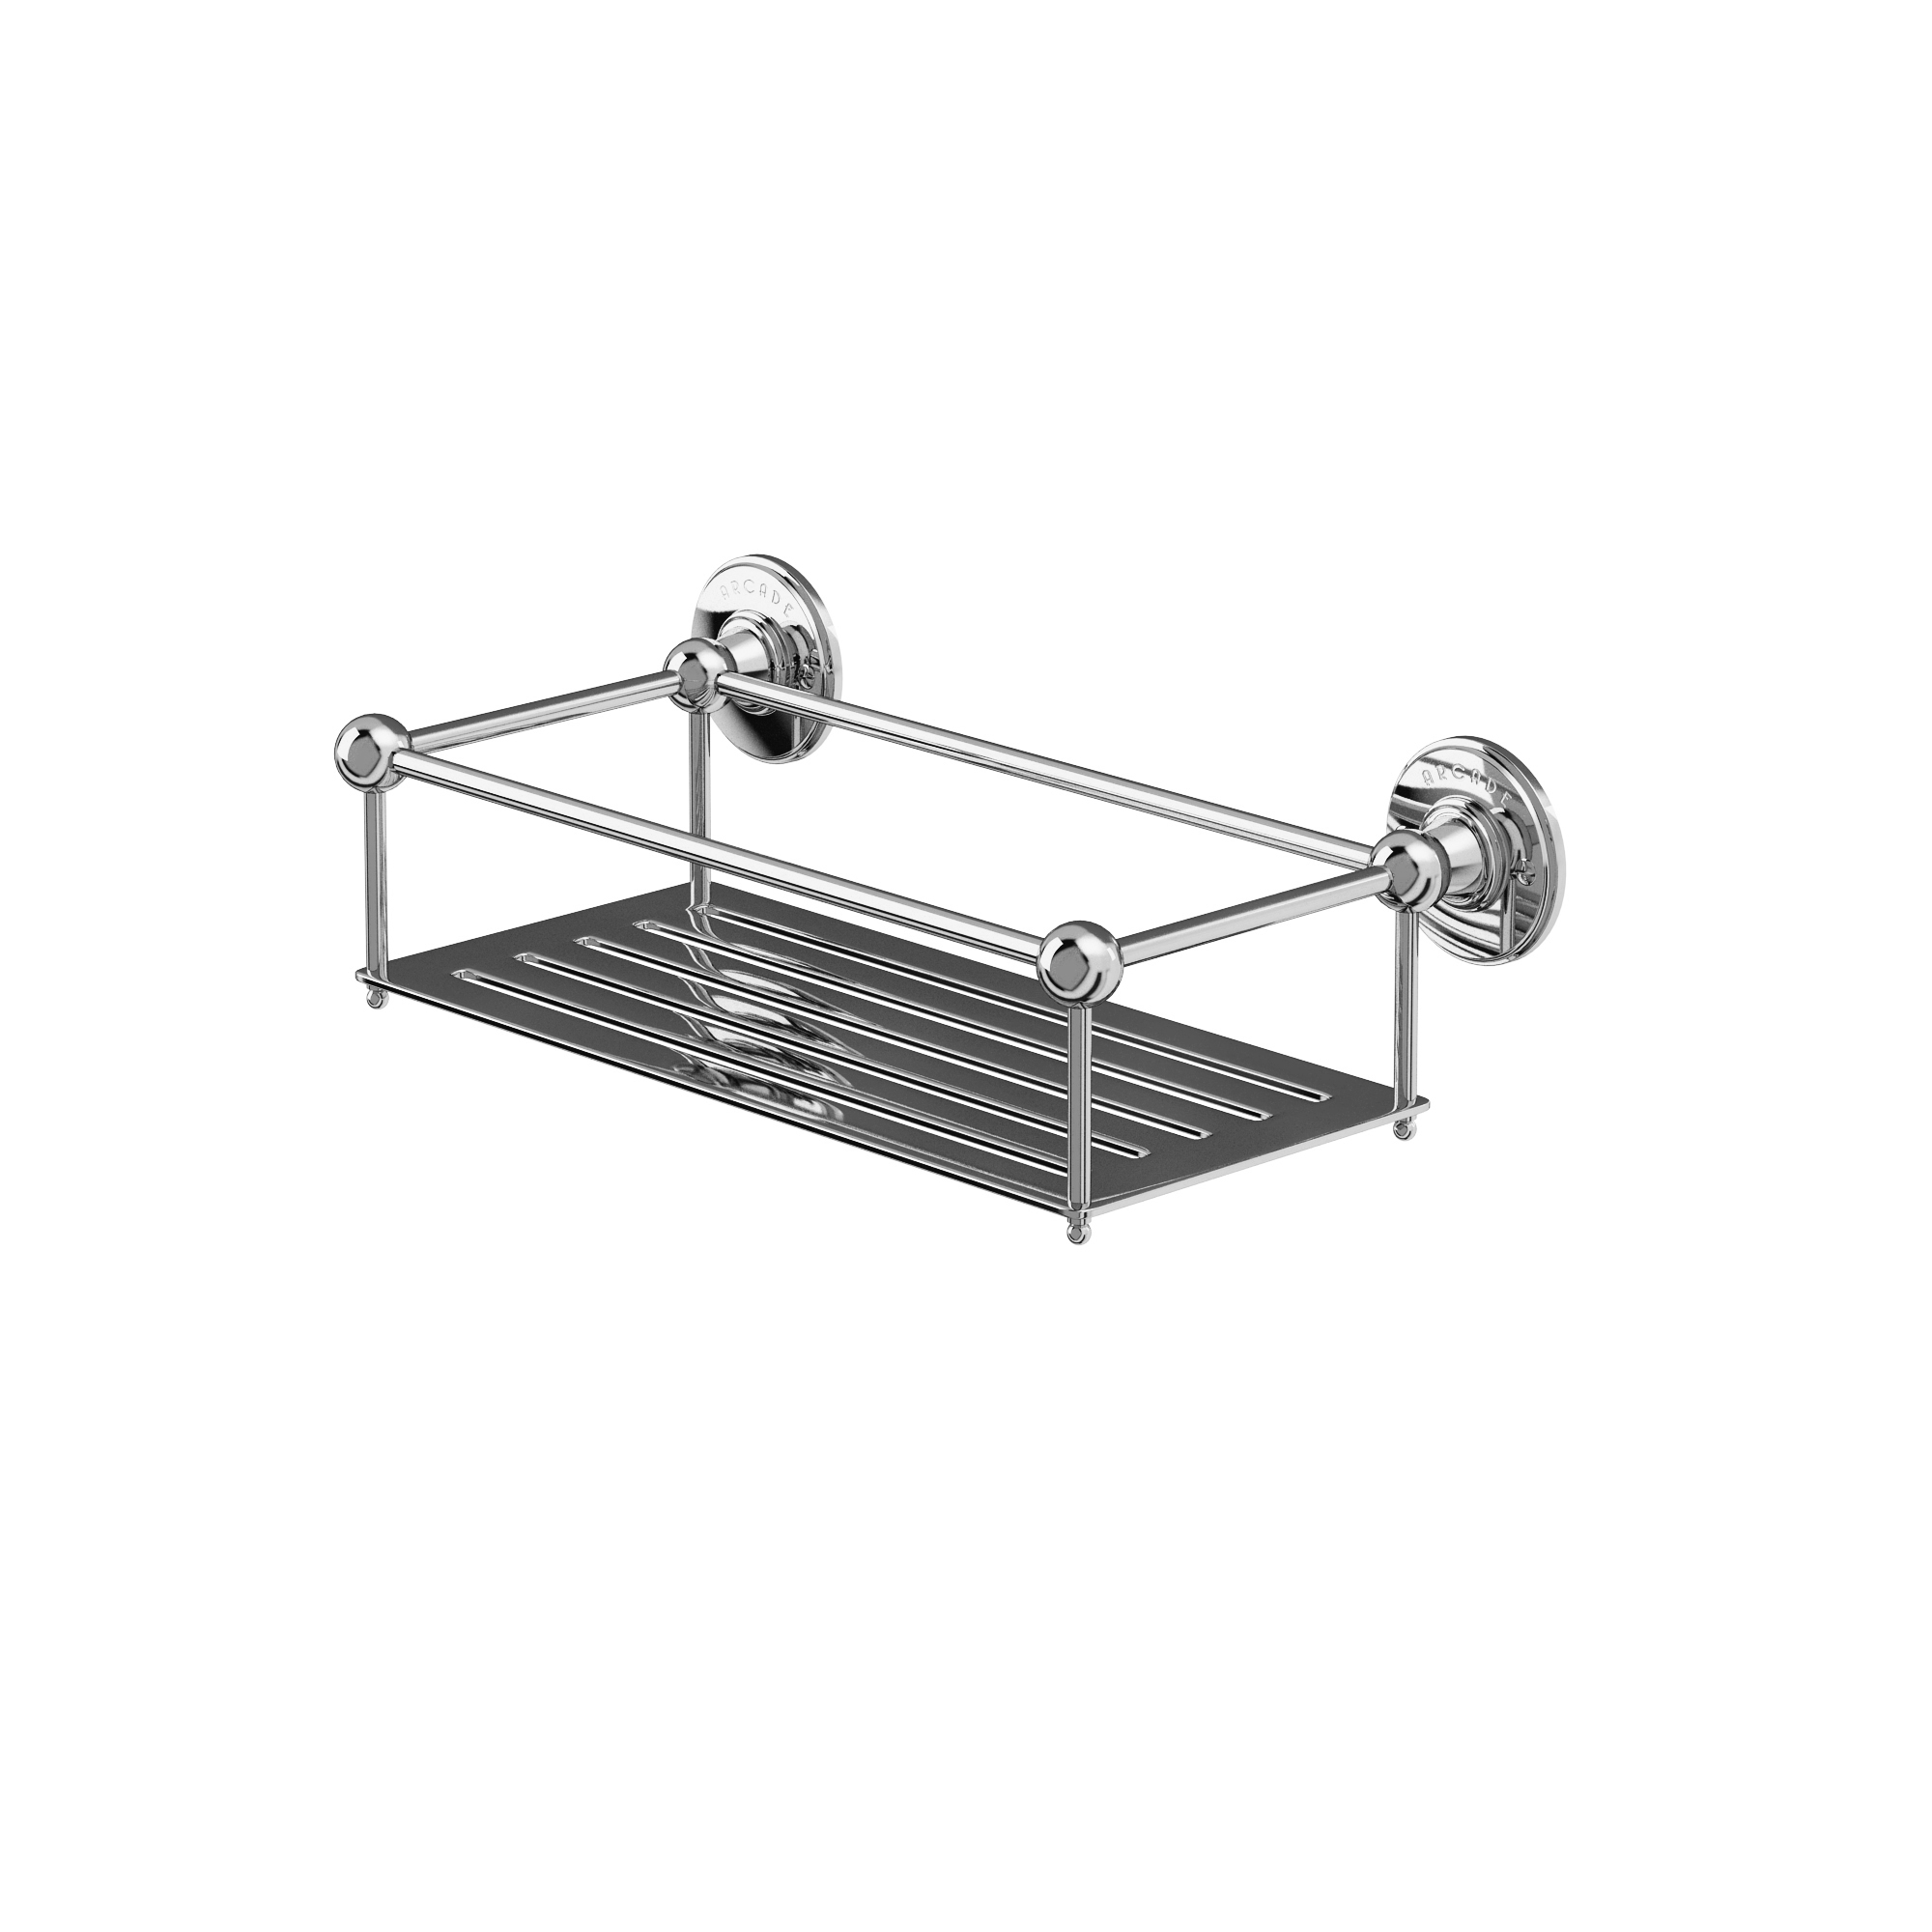 Arcade Wall-mounted wire basket 62mm deep (155mm by 330mm) - chrome